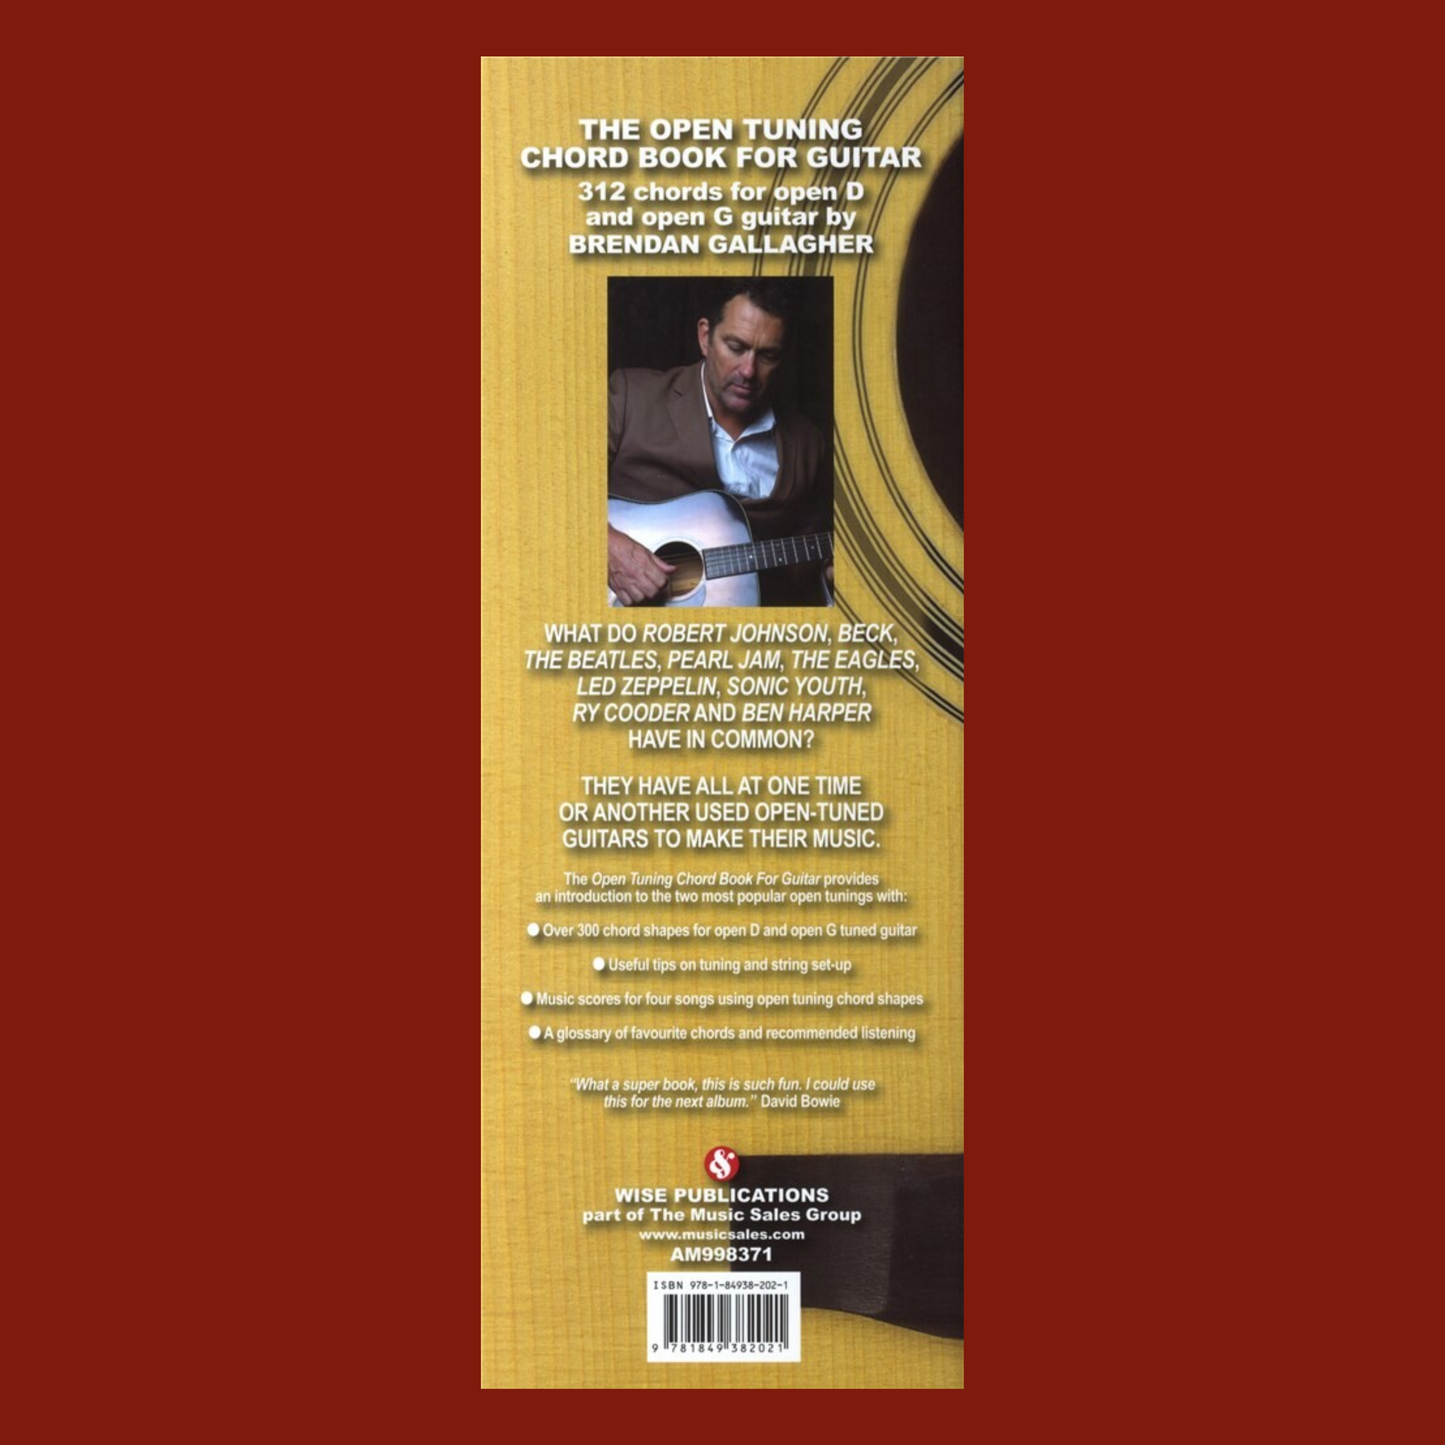 The Open Tuning Chord Book For Guitar